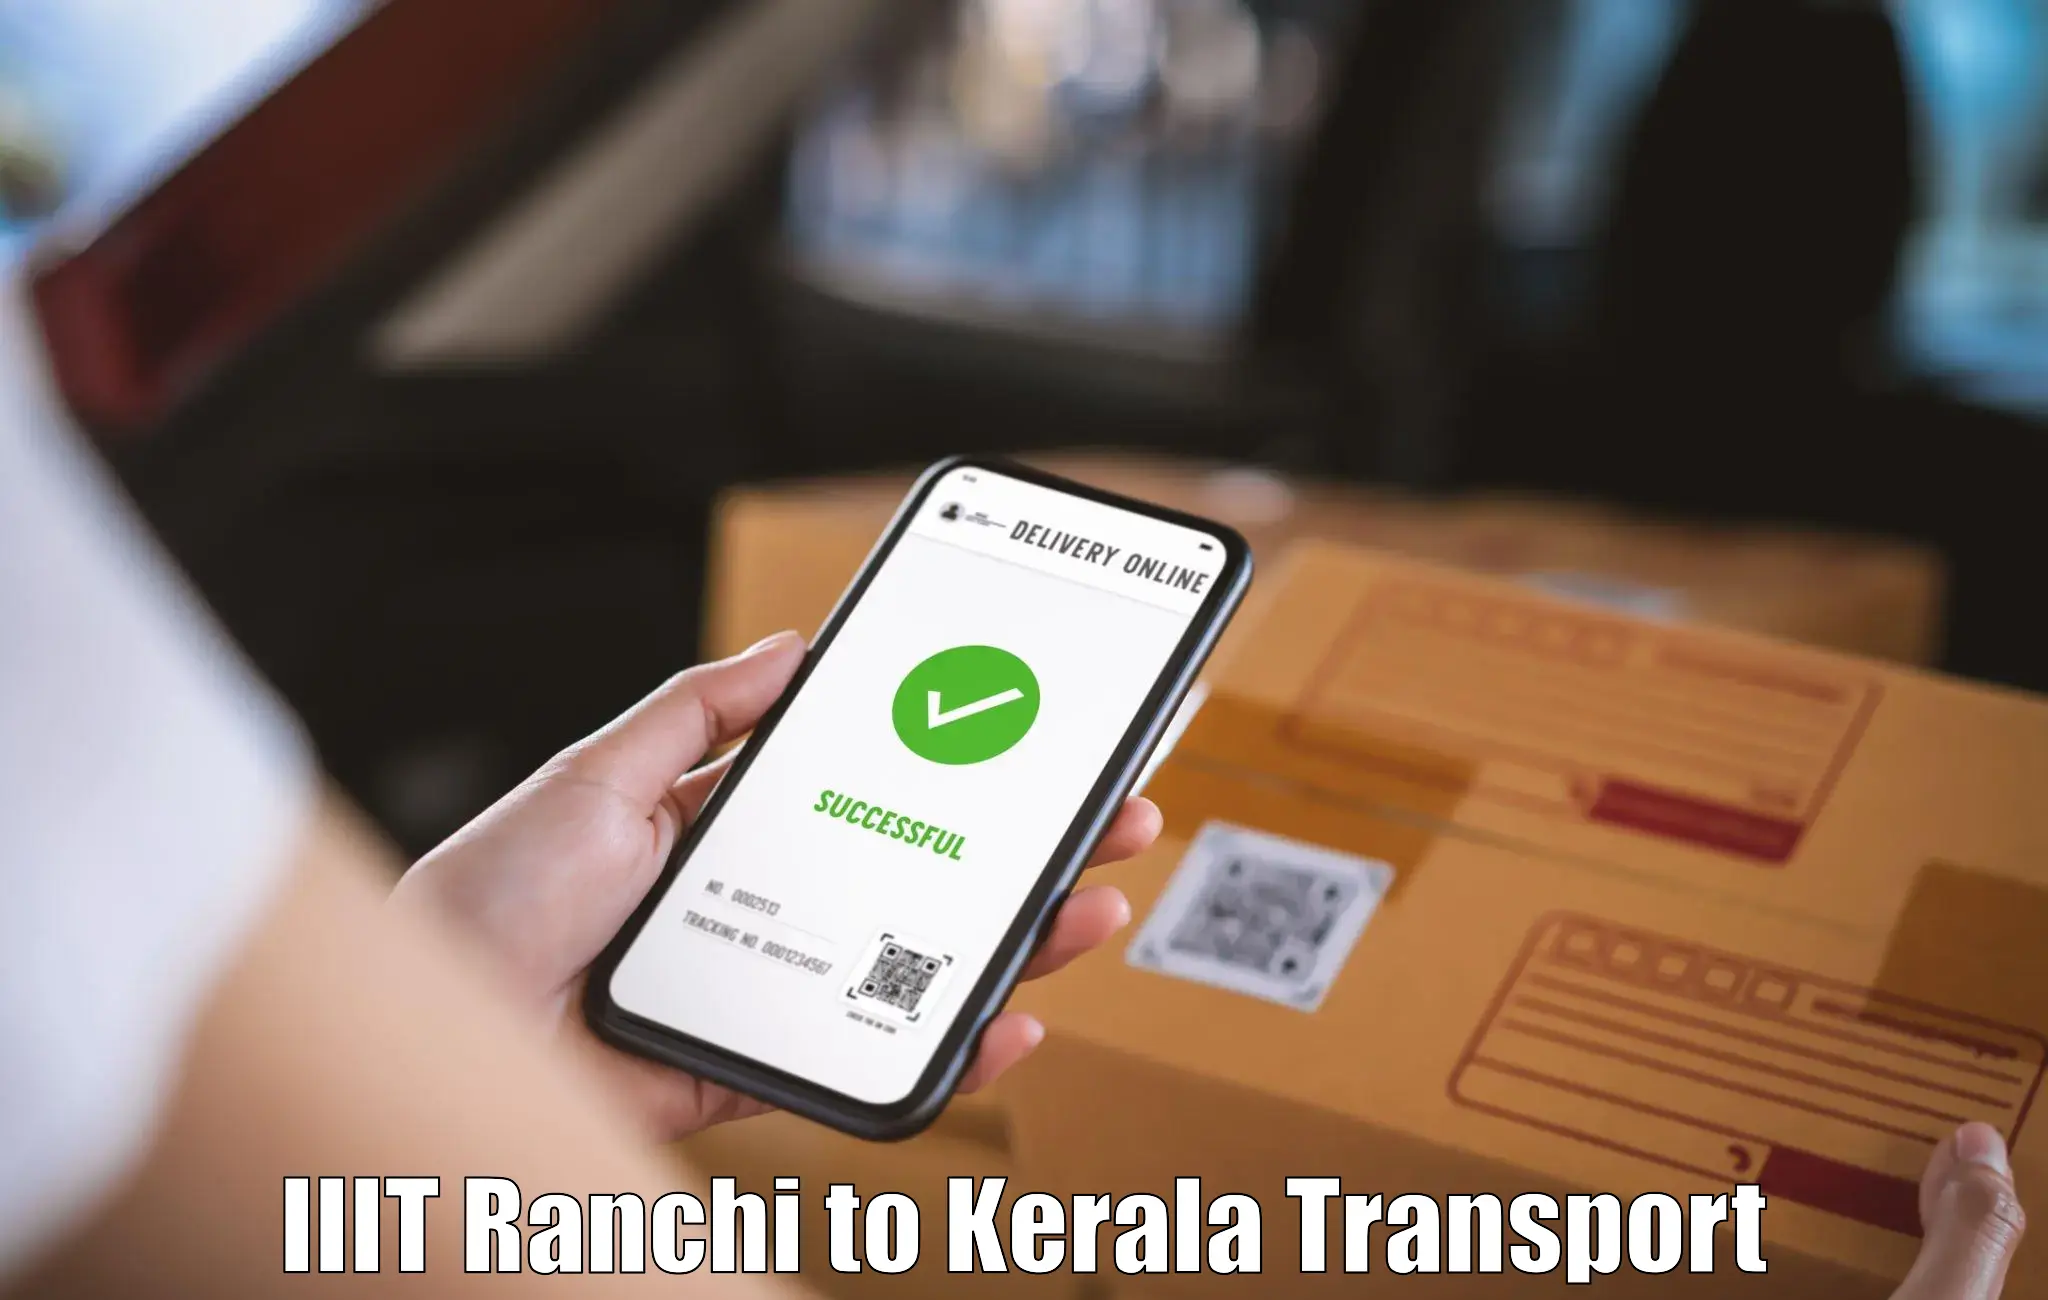 Air freight transport services in IIIT Ranchi to Kottayam